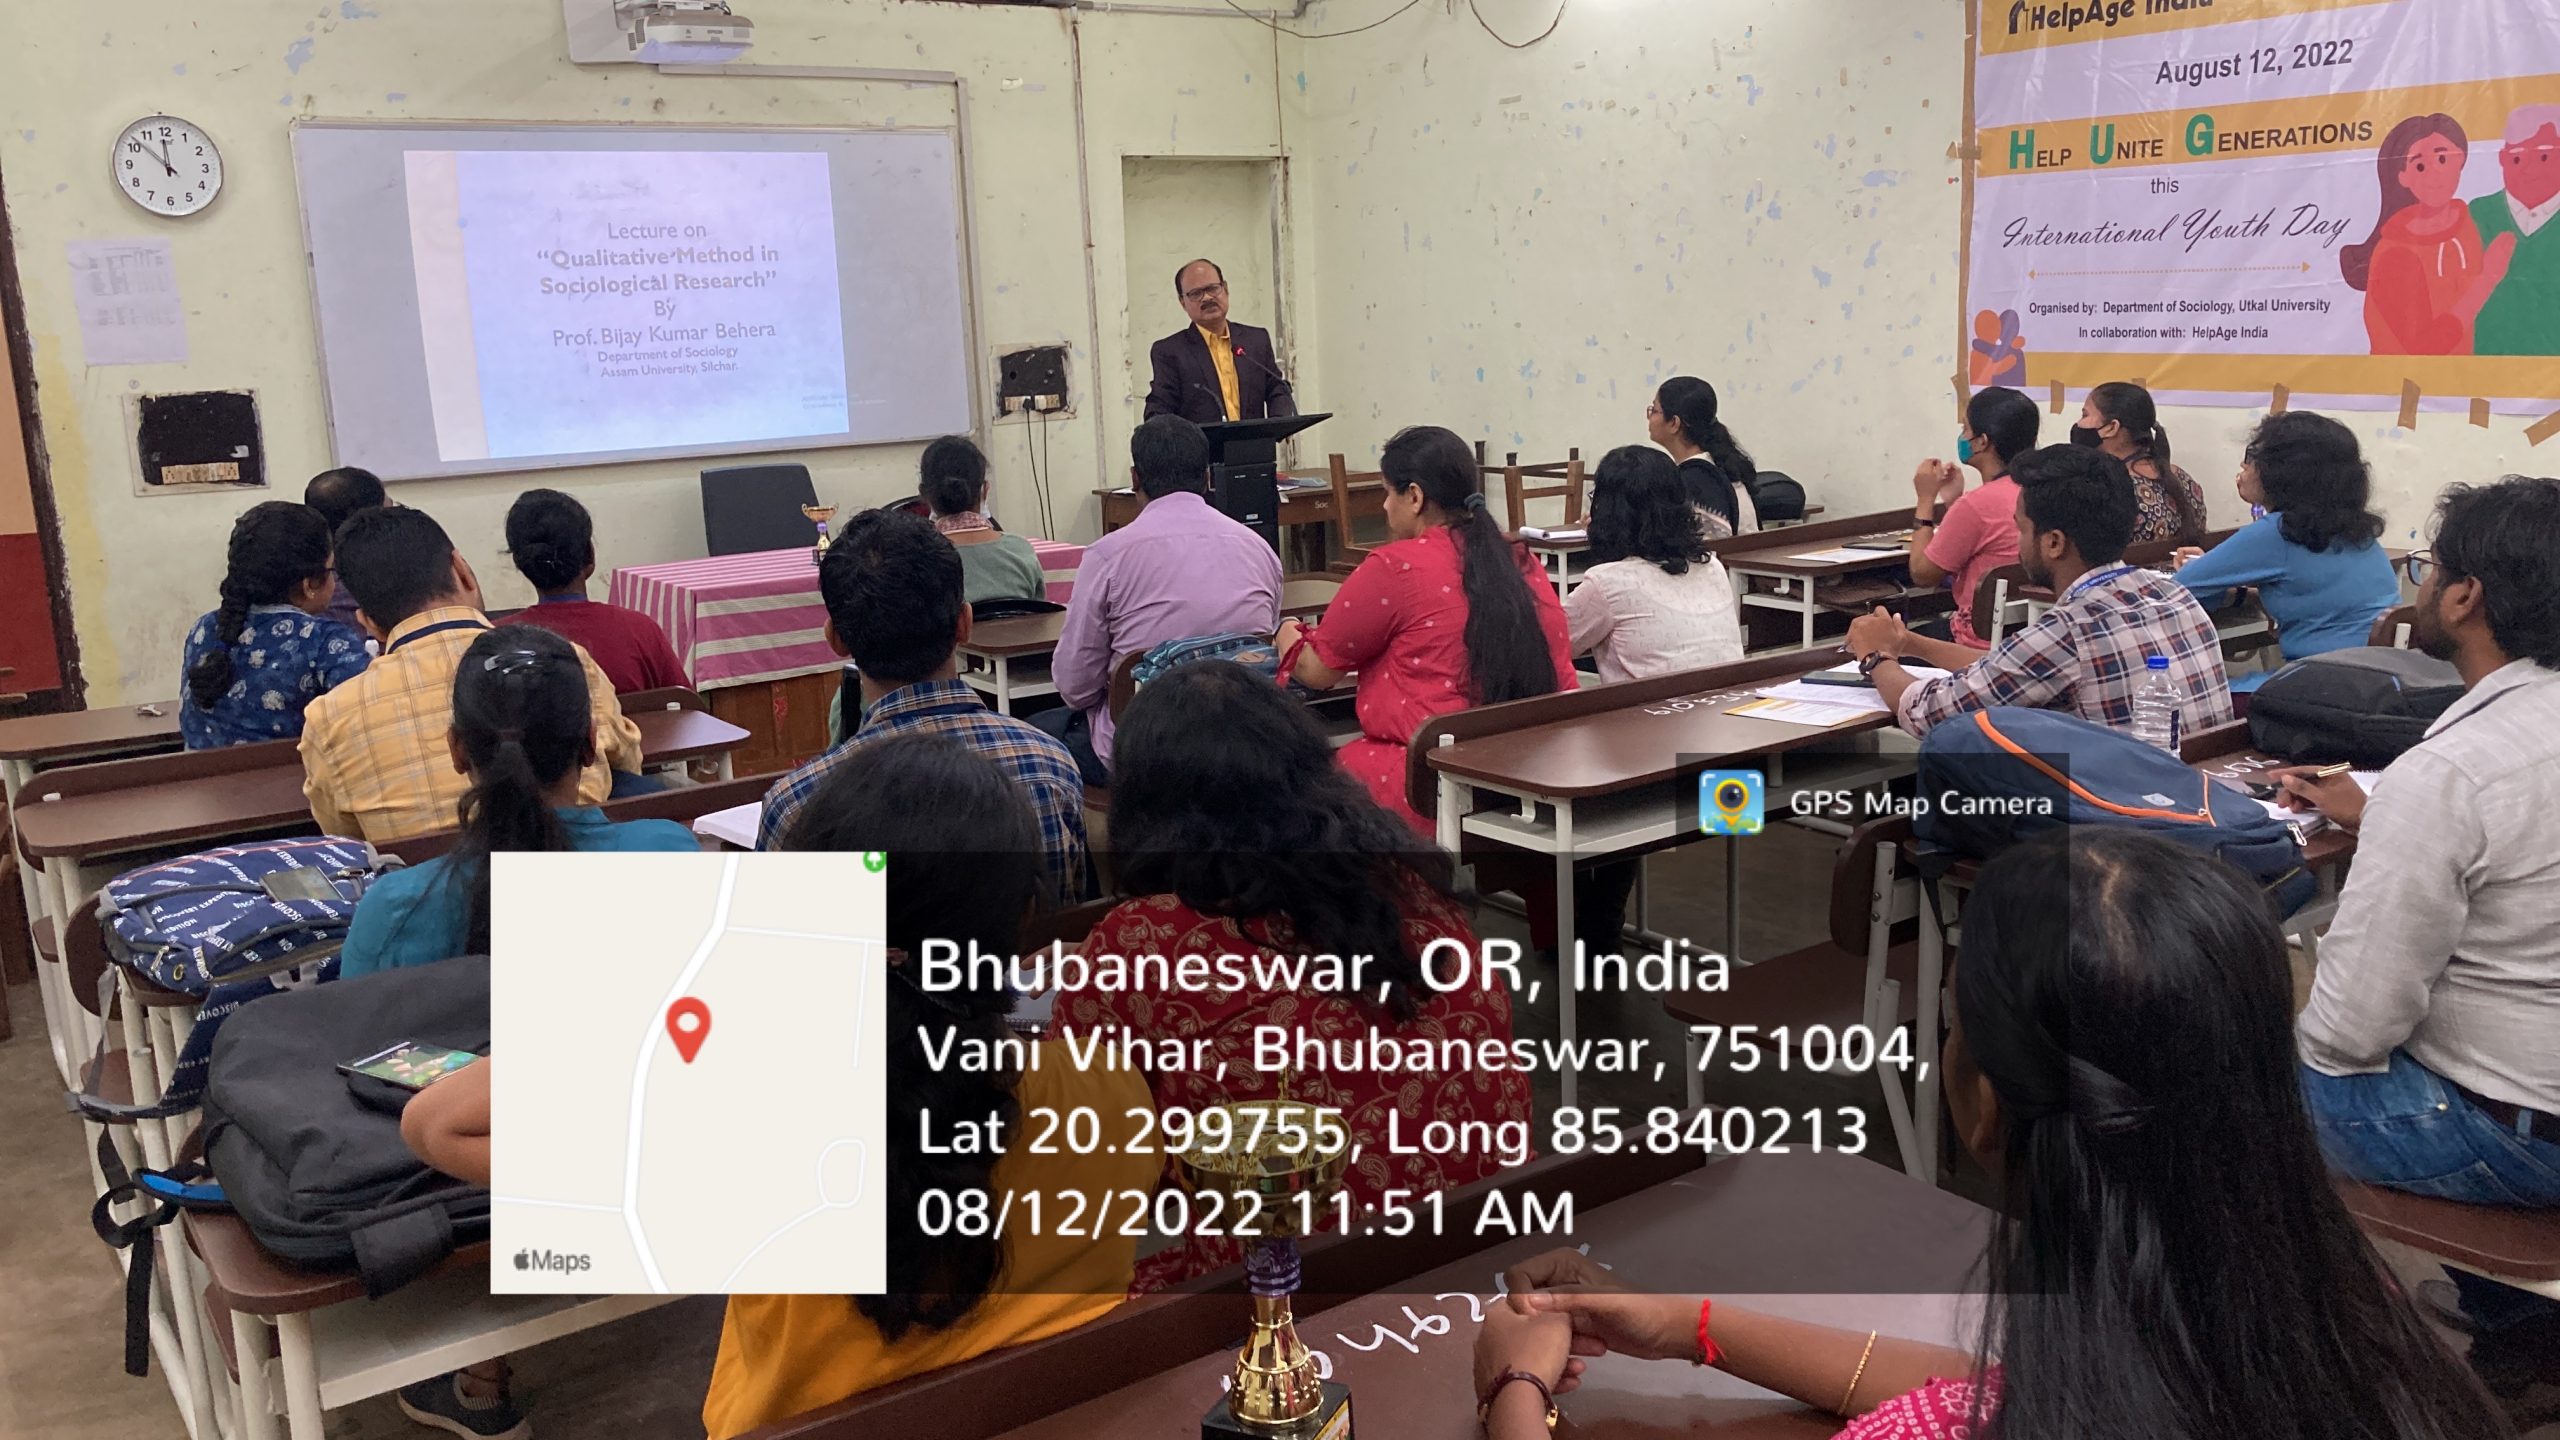 Lecture on “Qualitative Method in Sociological Research” by Prof. Bijaya K. Behera on 12 August 2022